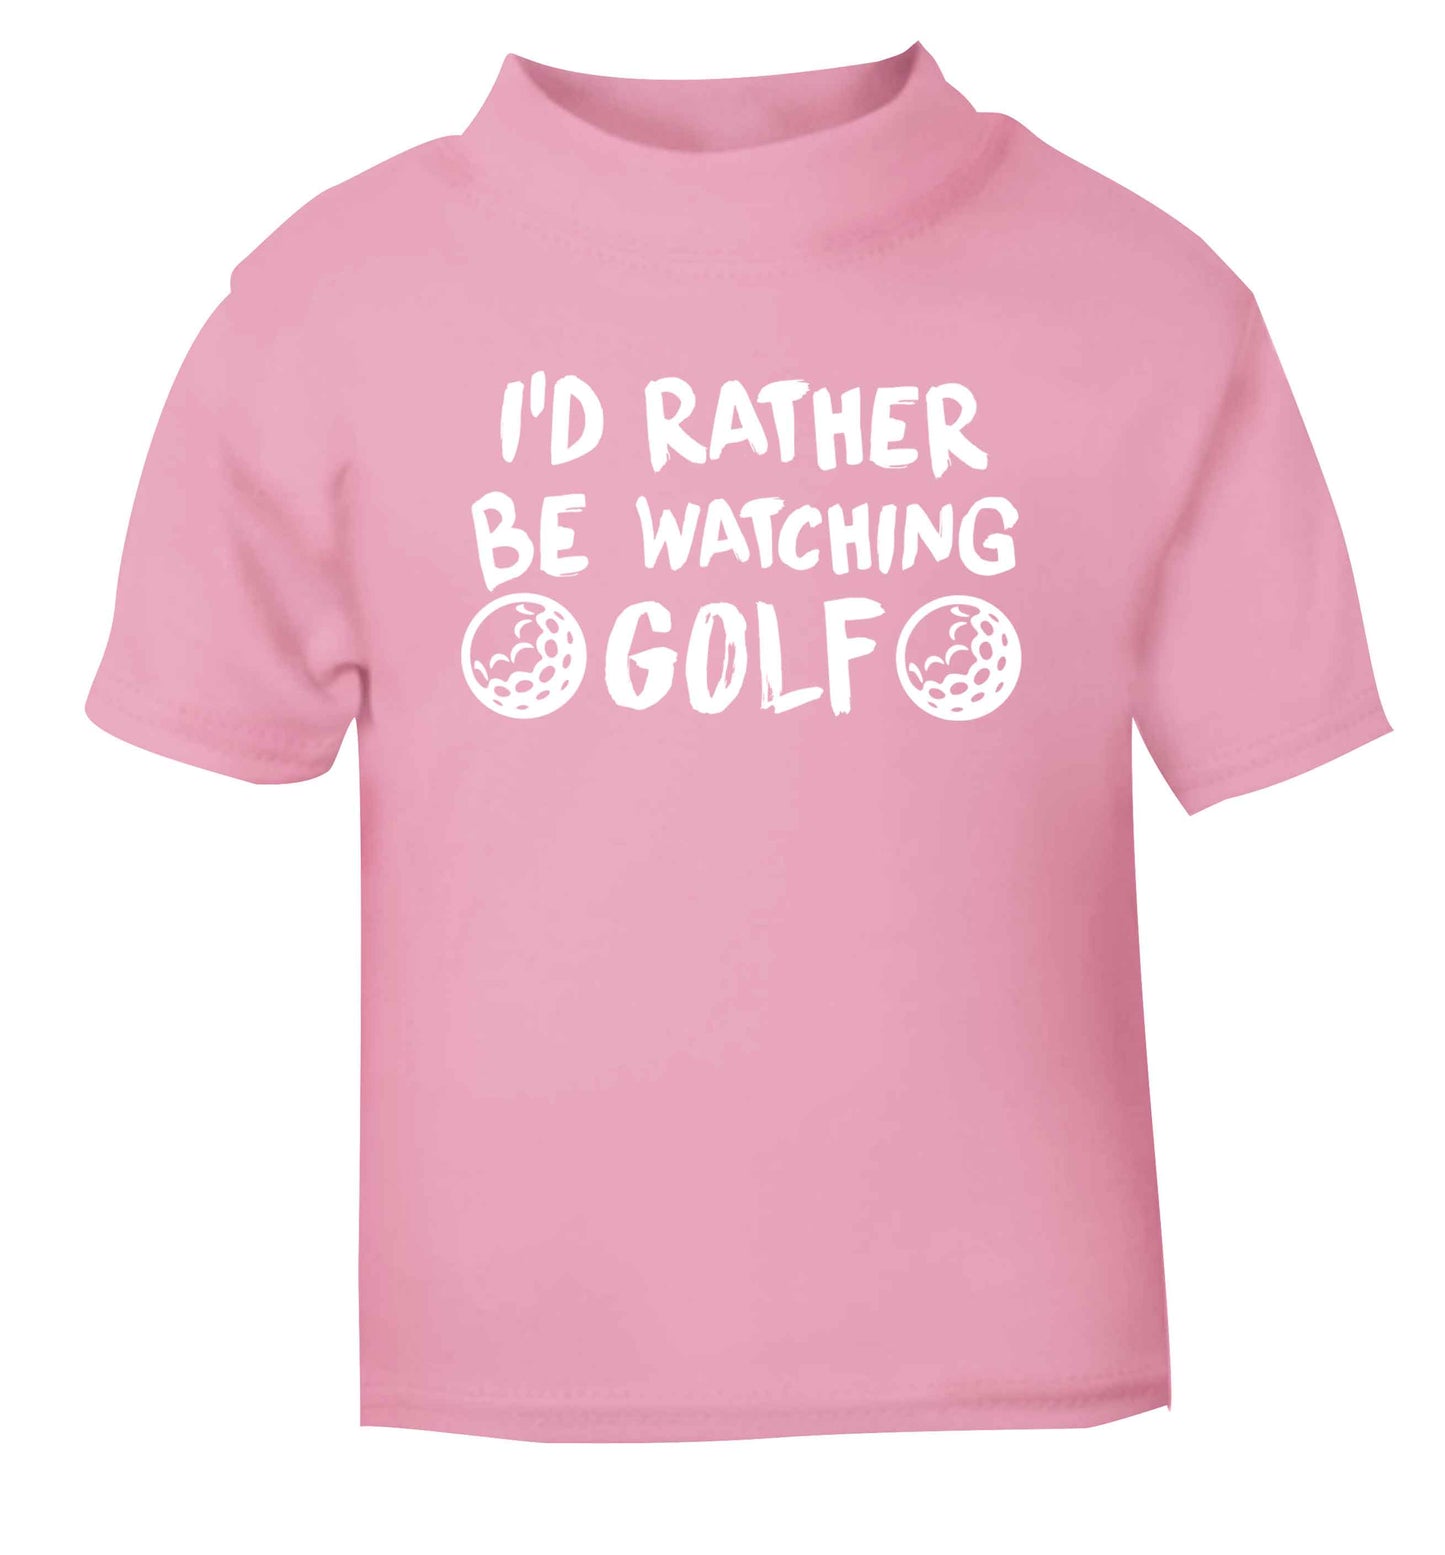 I'd rather be watching golf light pink Baby Toddler Tshirt 2 Years